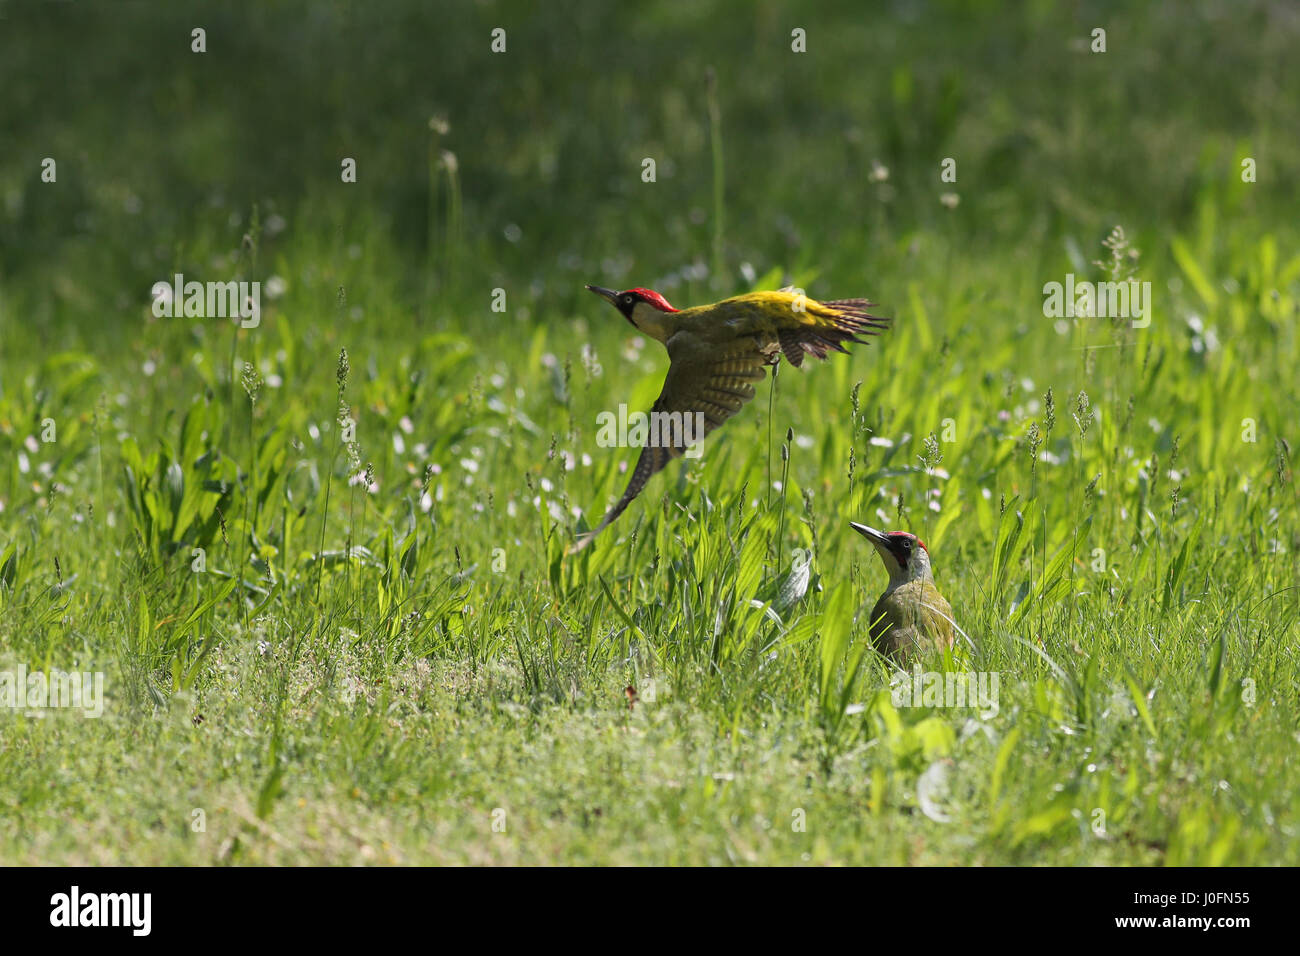 Two green woodpeckers in tall grass, one in flight Stock Photo